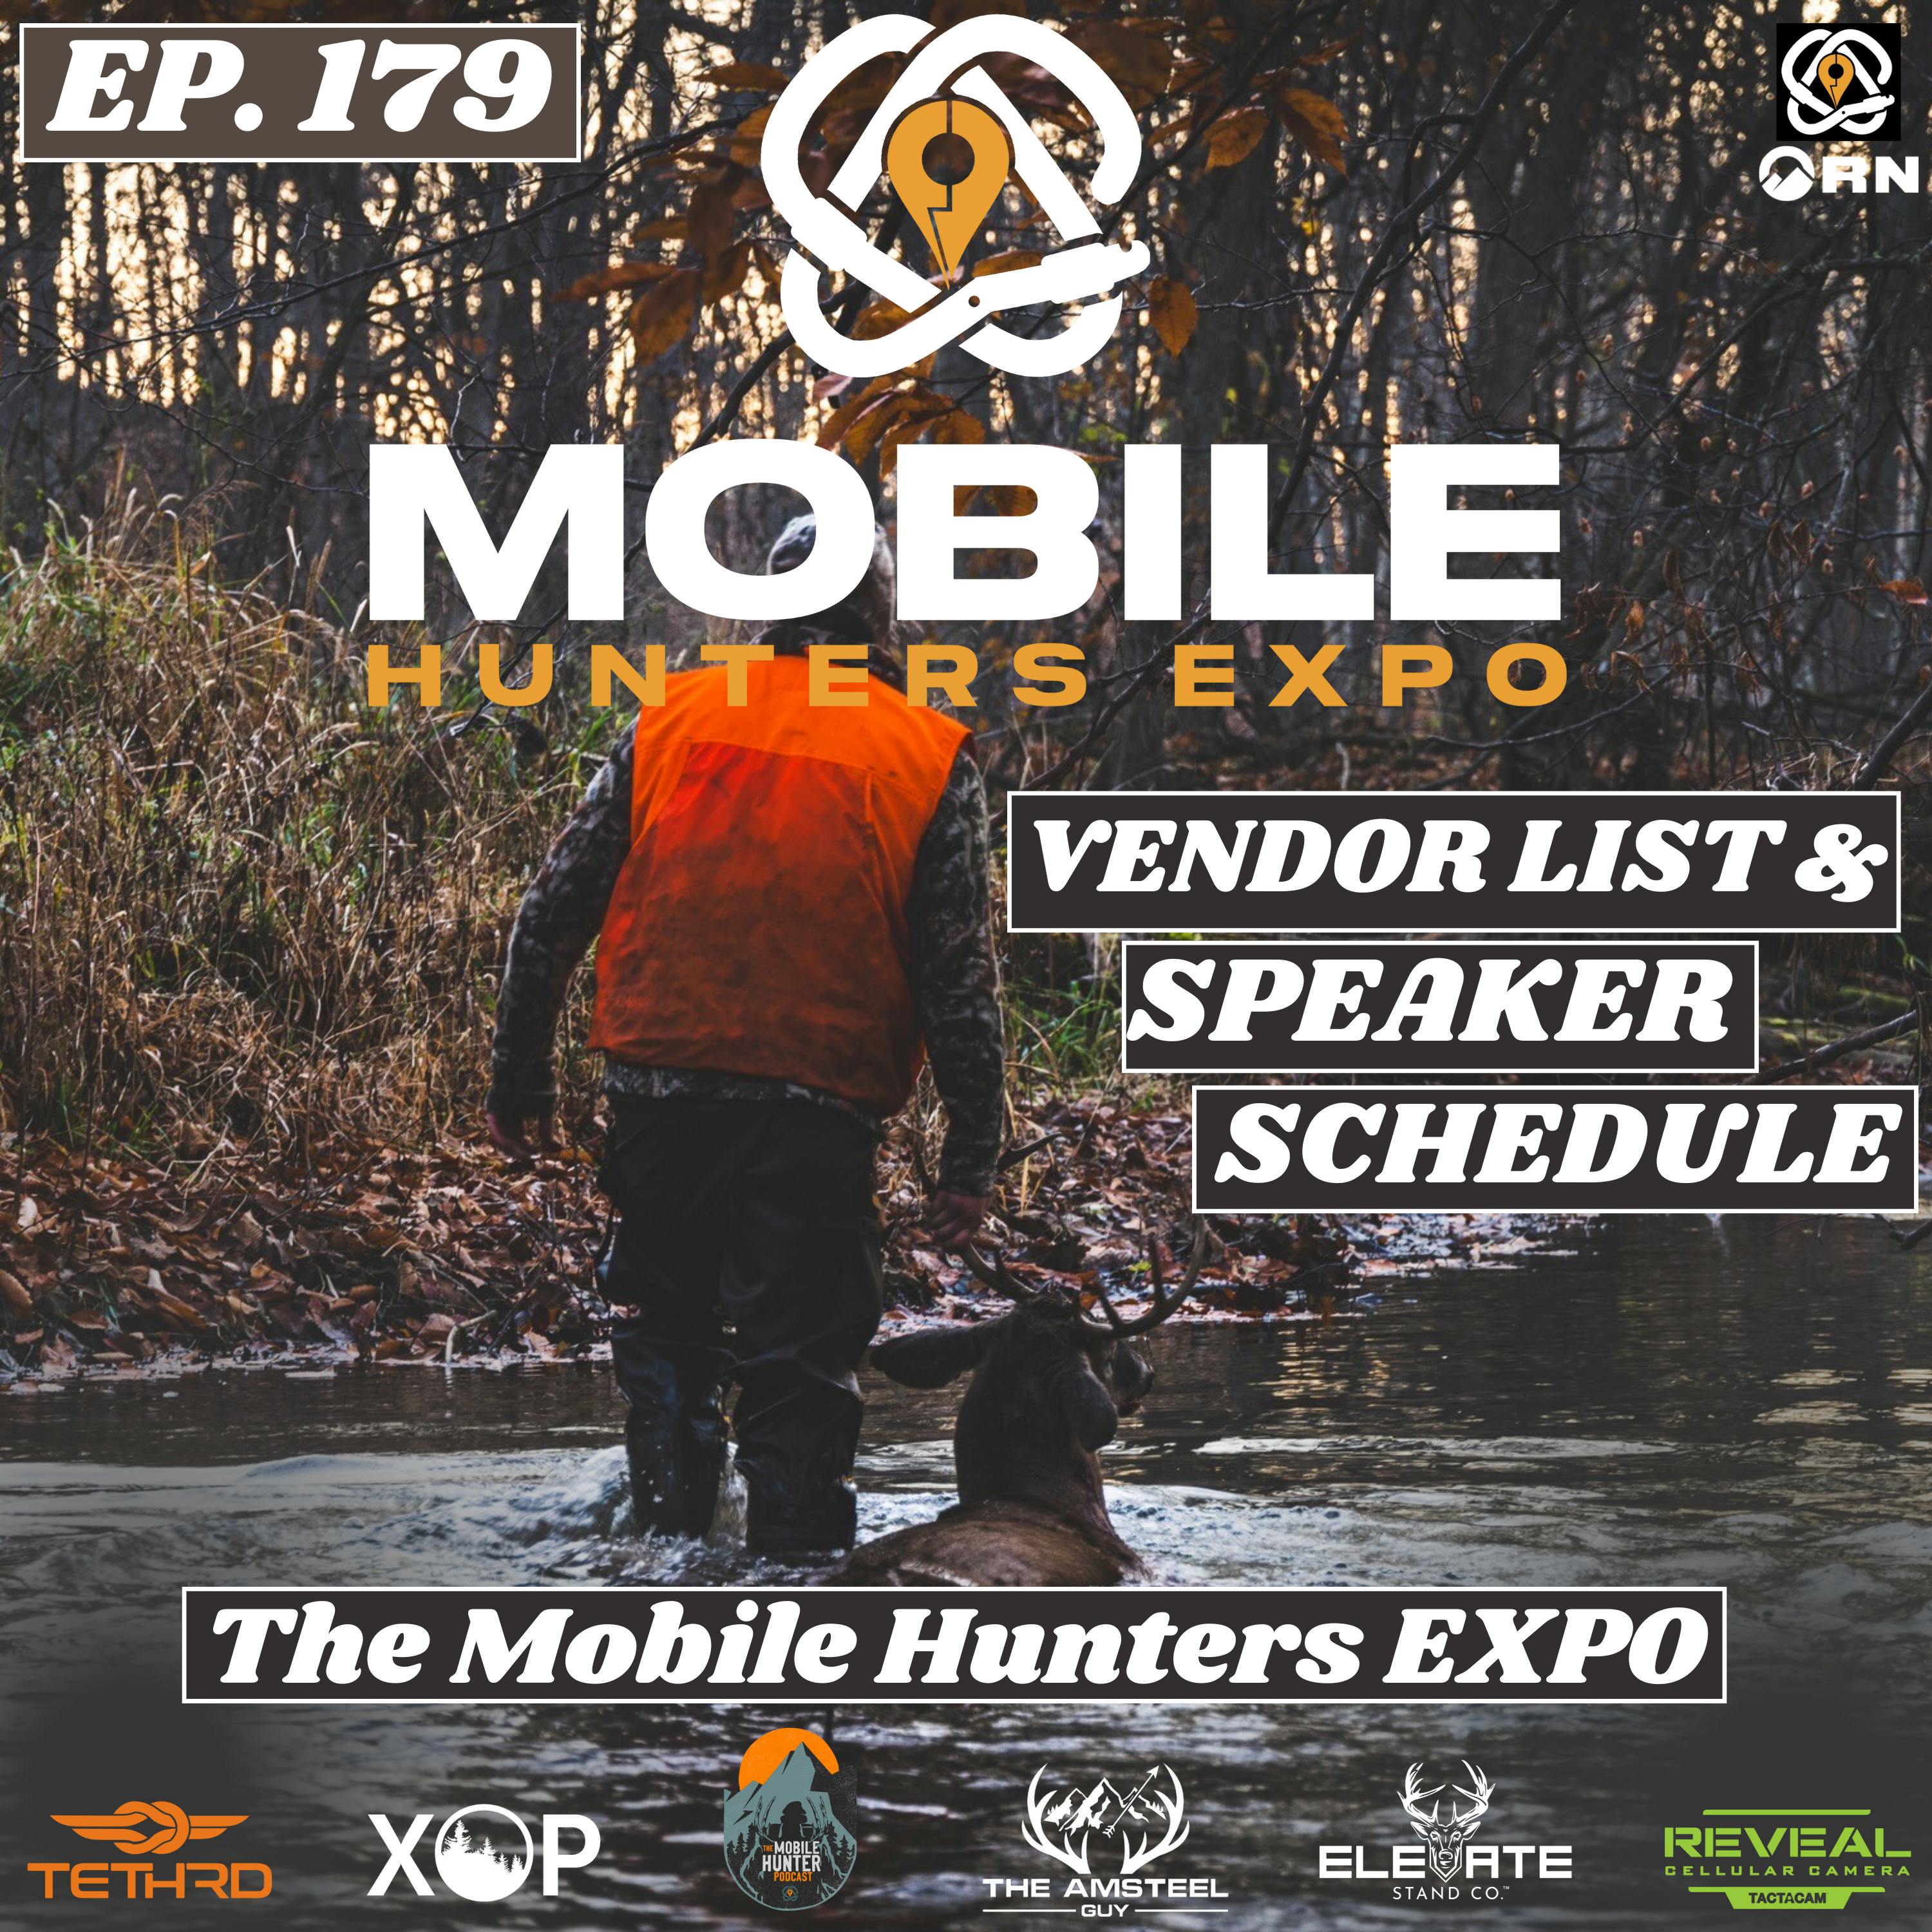 The Mobile Hunters Expo: Vendor List and Speaker Schedule